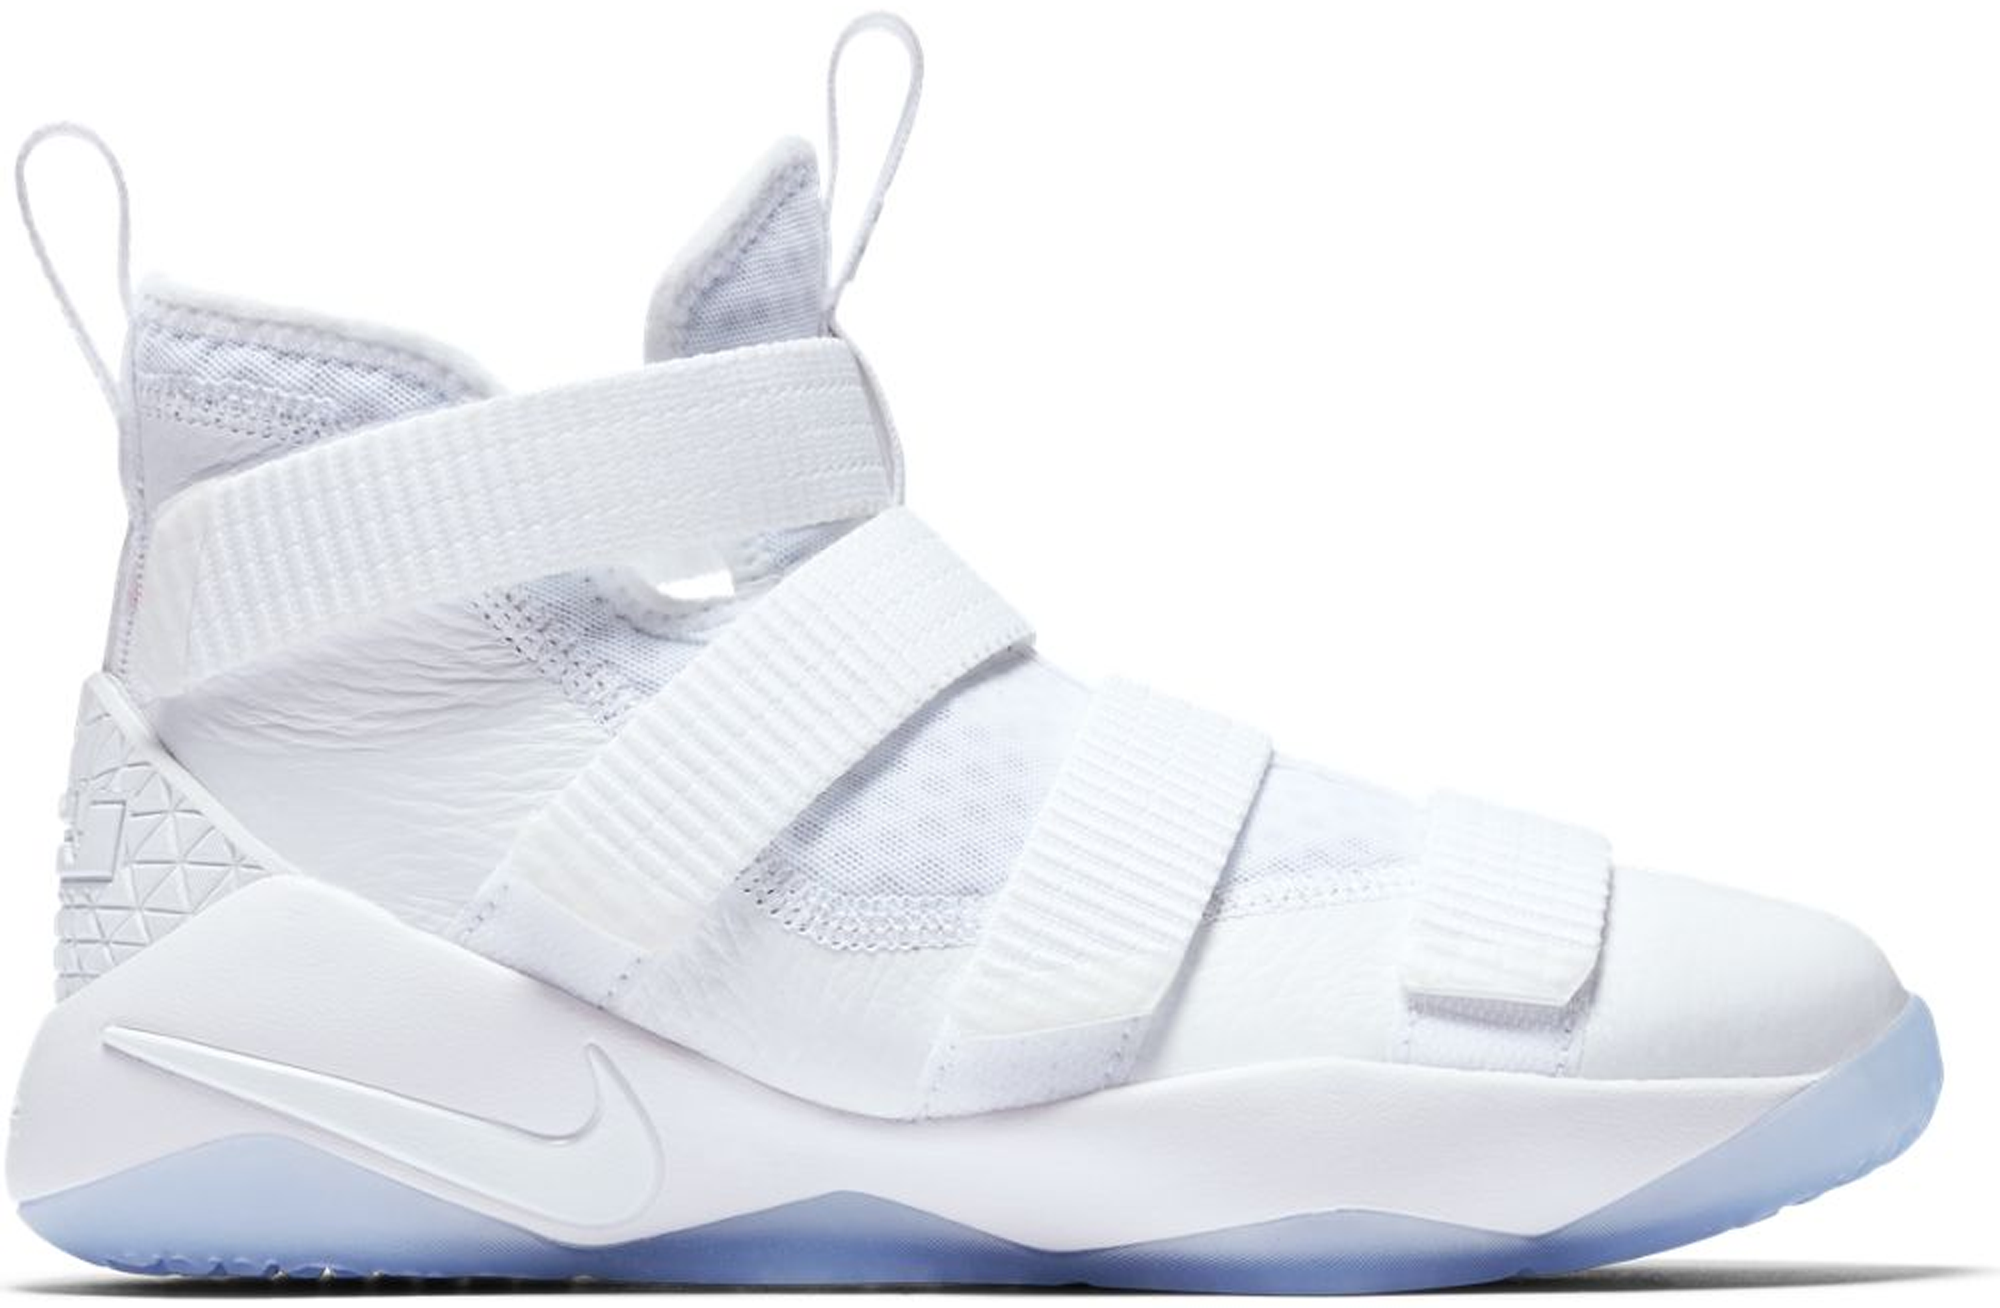 lebron soldier 11 all white